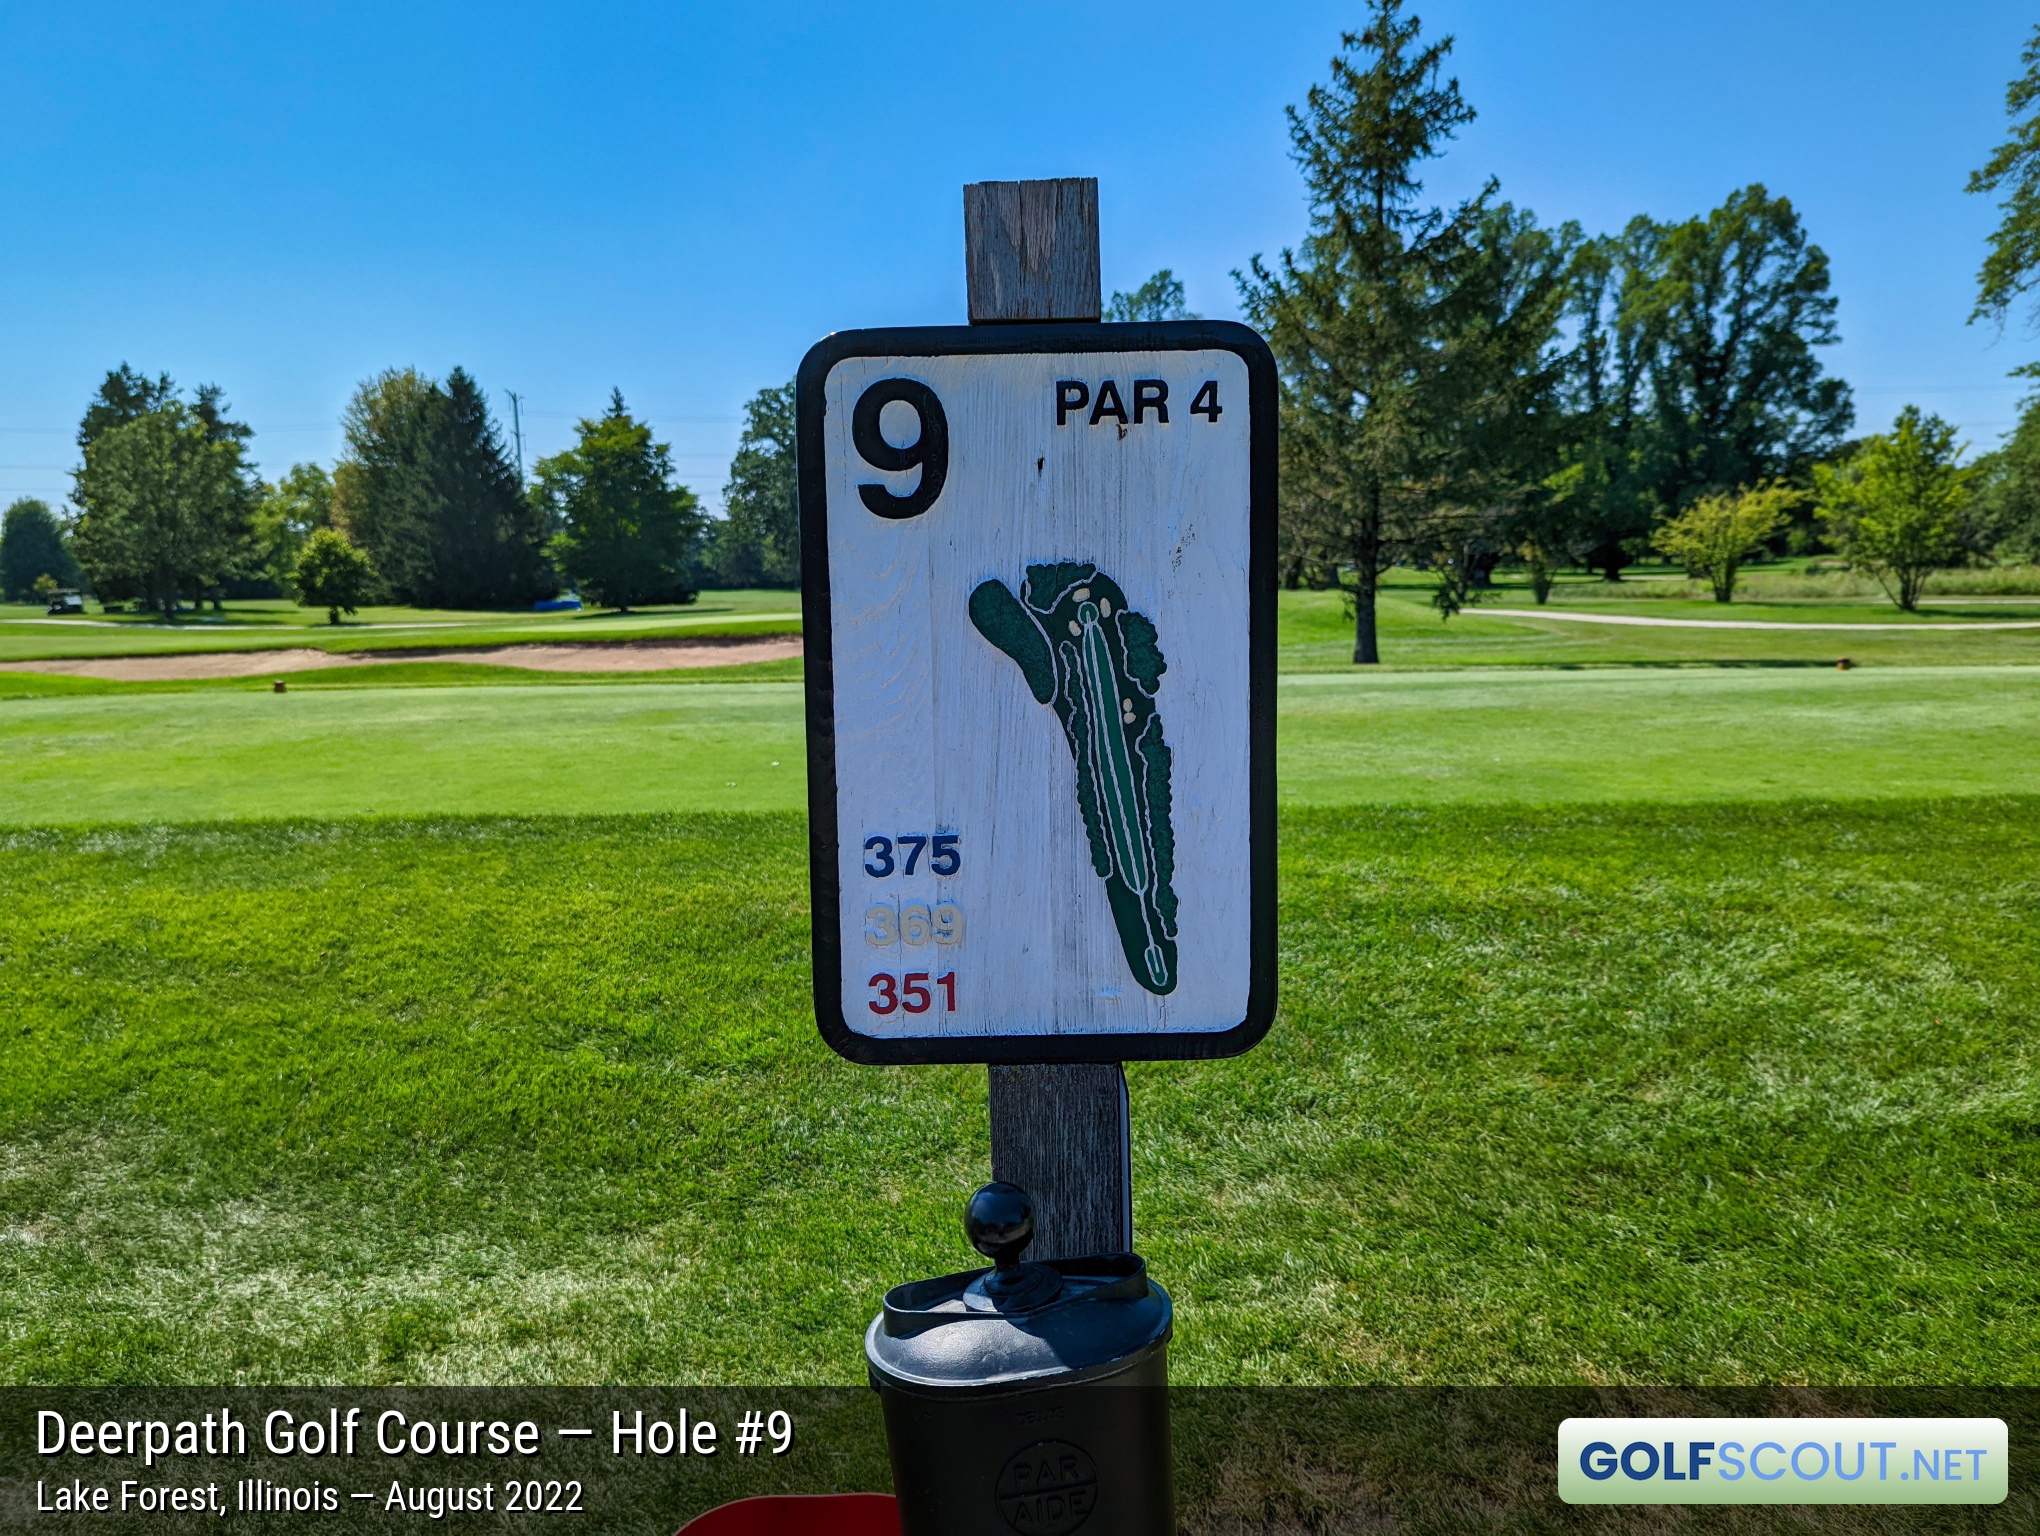 Photo of hole #9 at Deerpath Golf Course in Lake Forest, Illinois. 